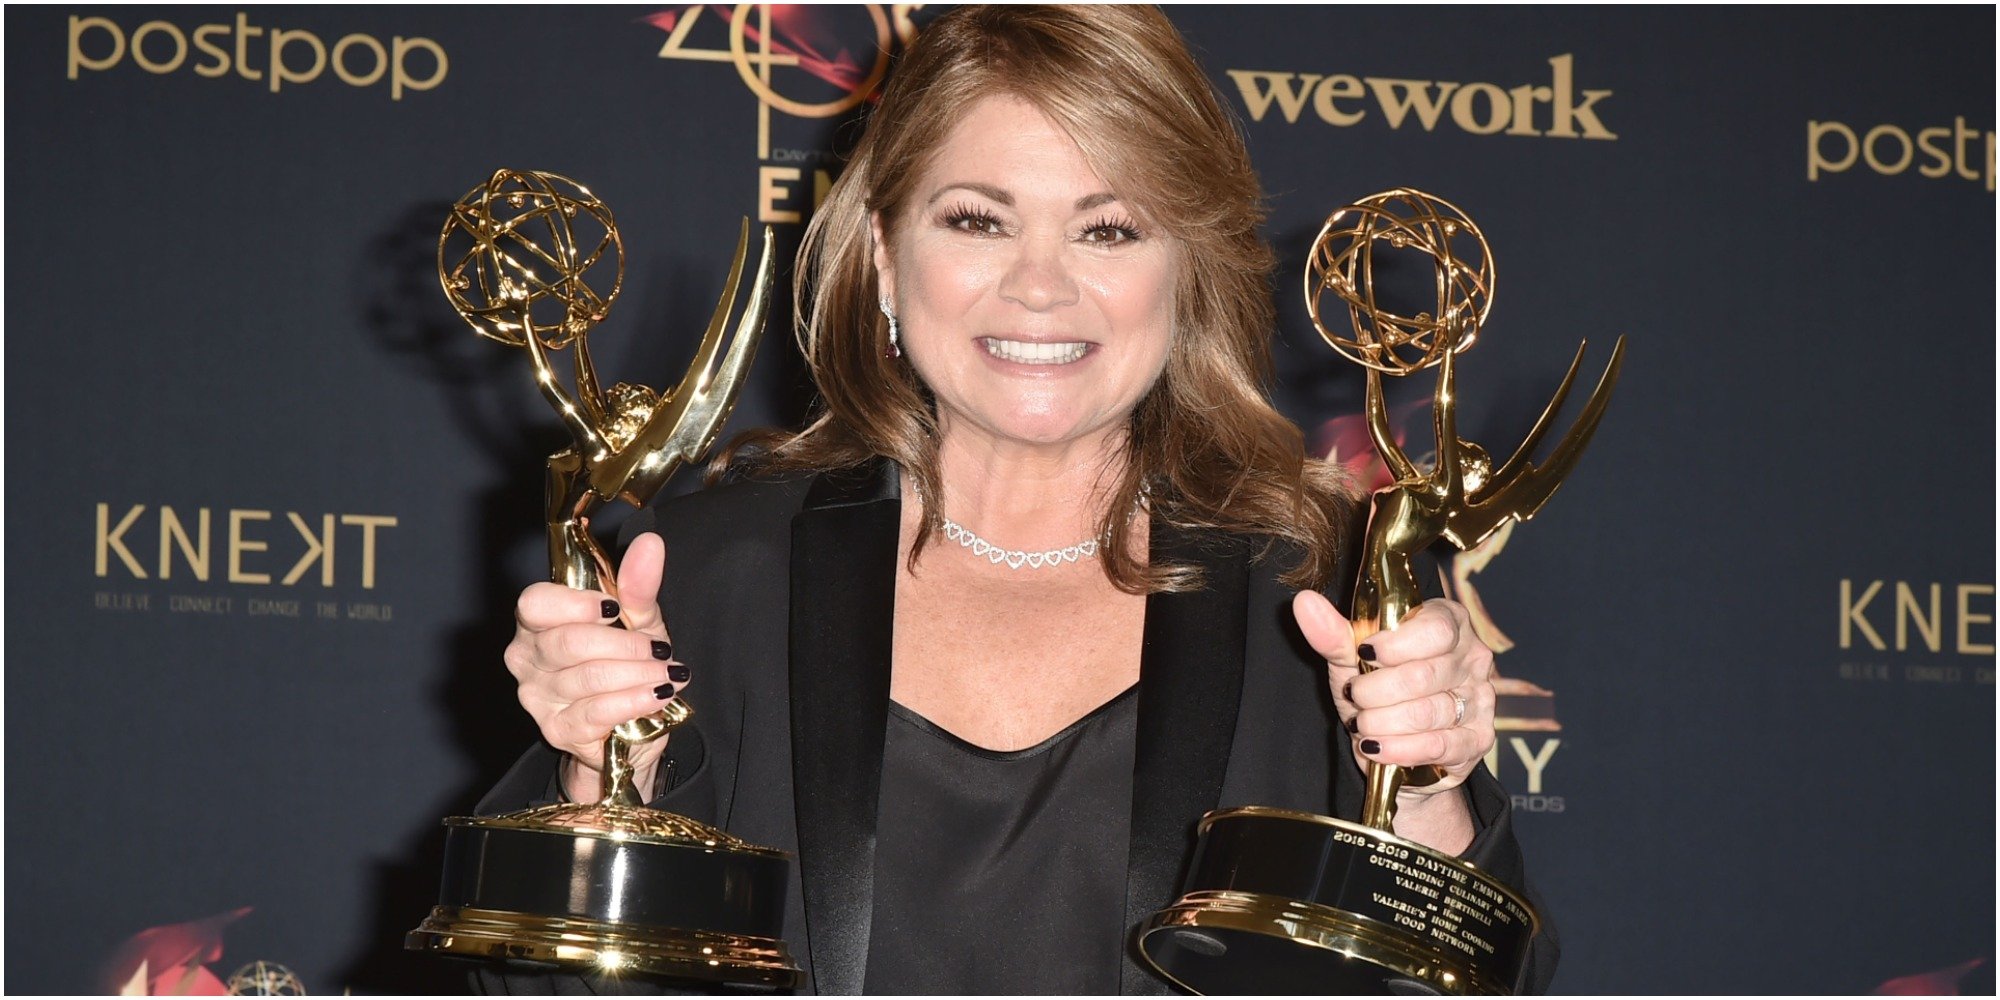 Valerie Bertinelli poses with two emmy awards in 2019.